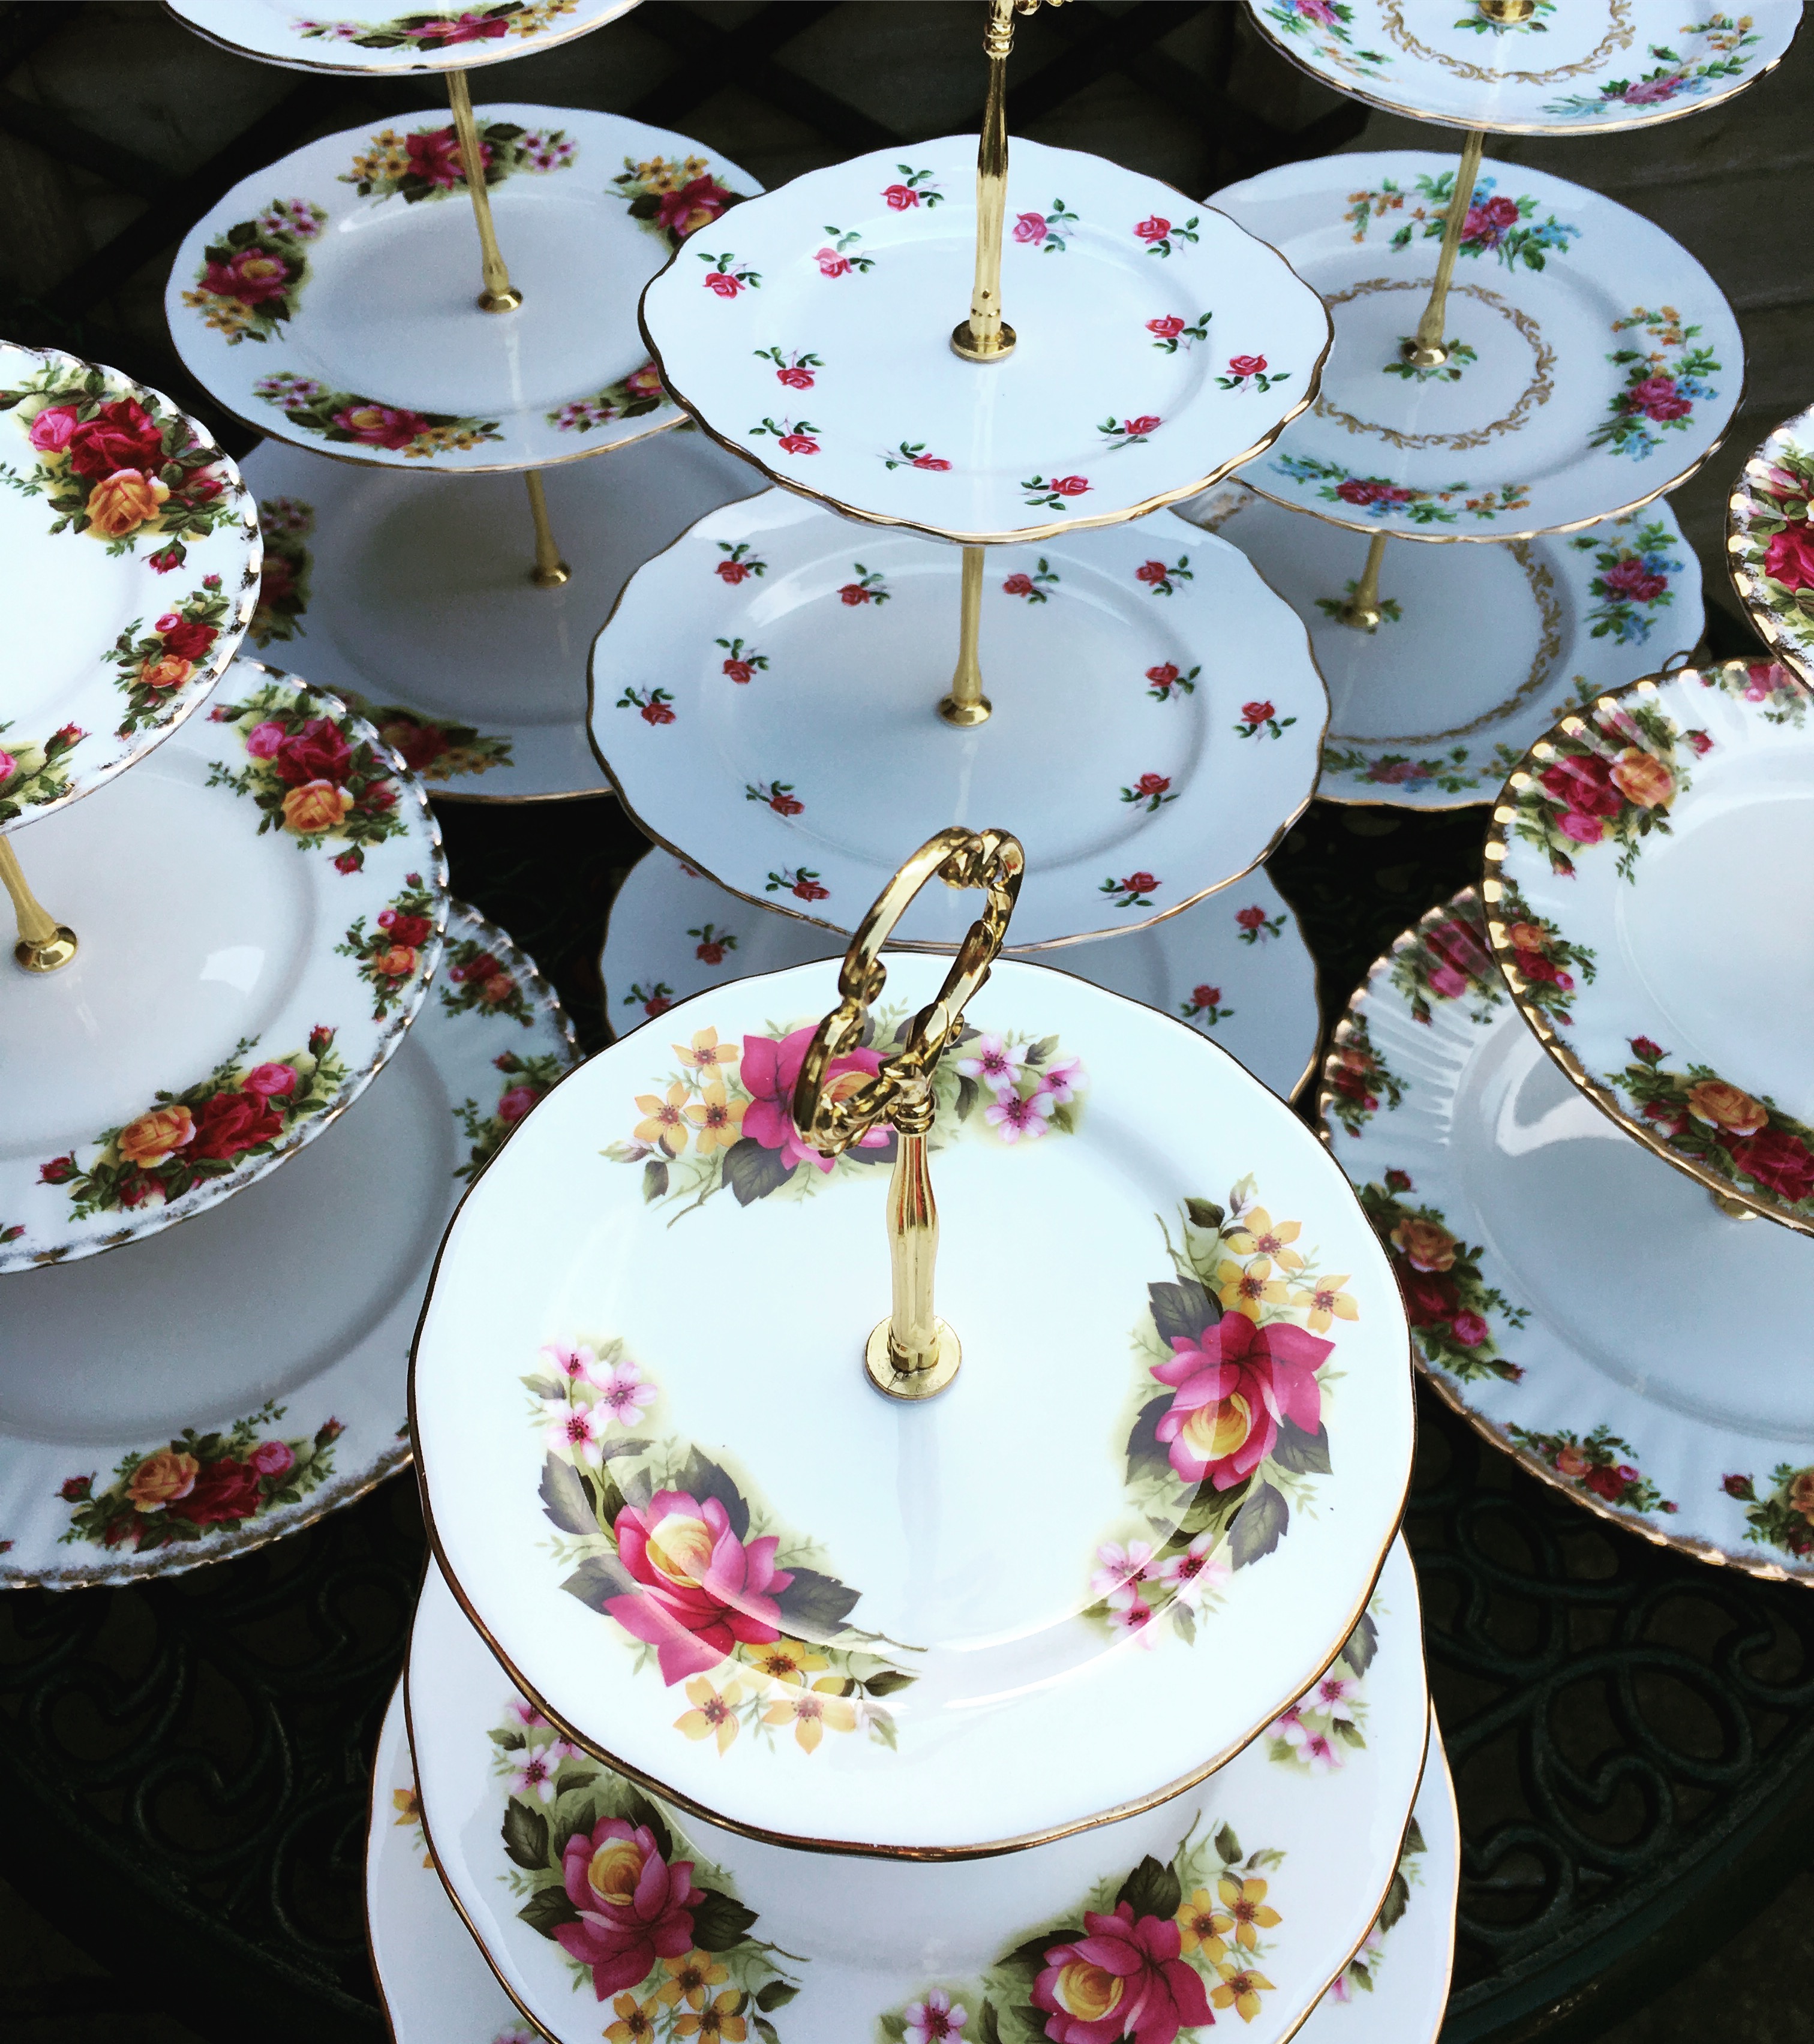 Vintage Cake Stands for hire - Brentwood Essex